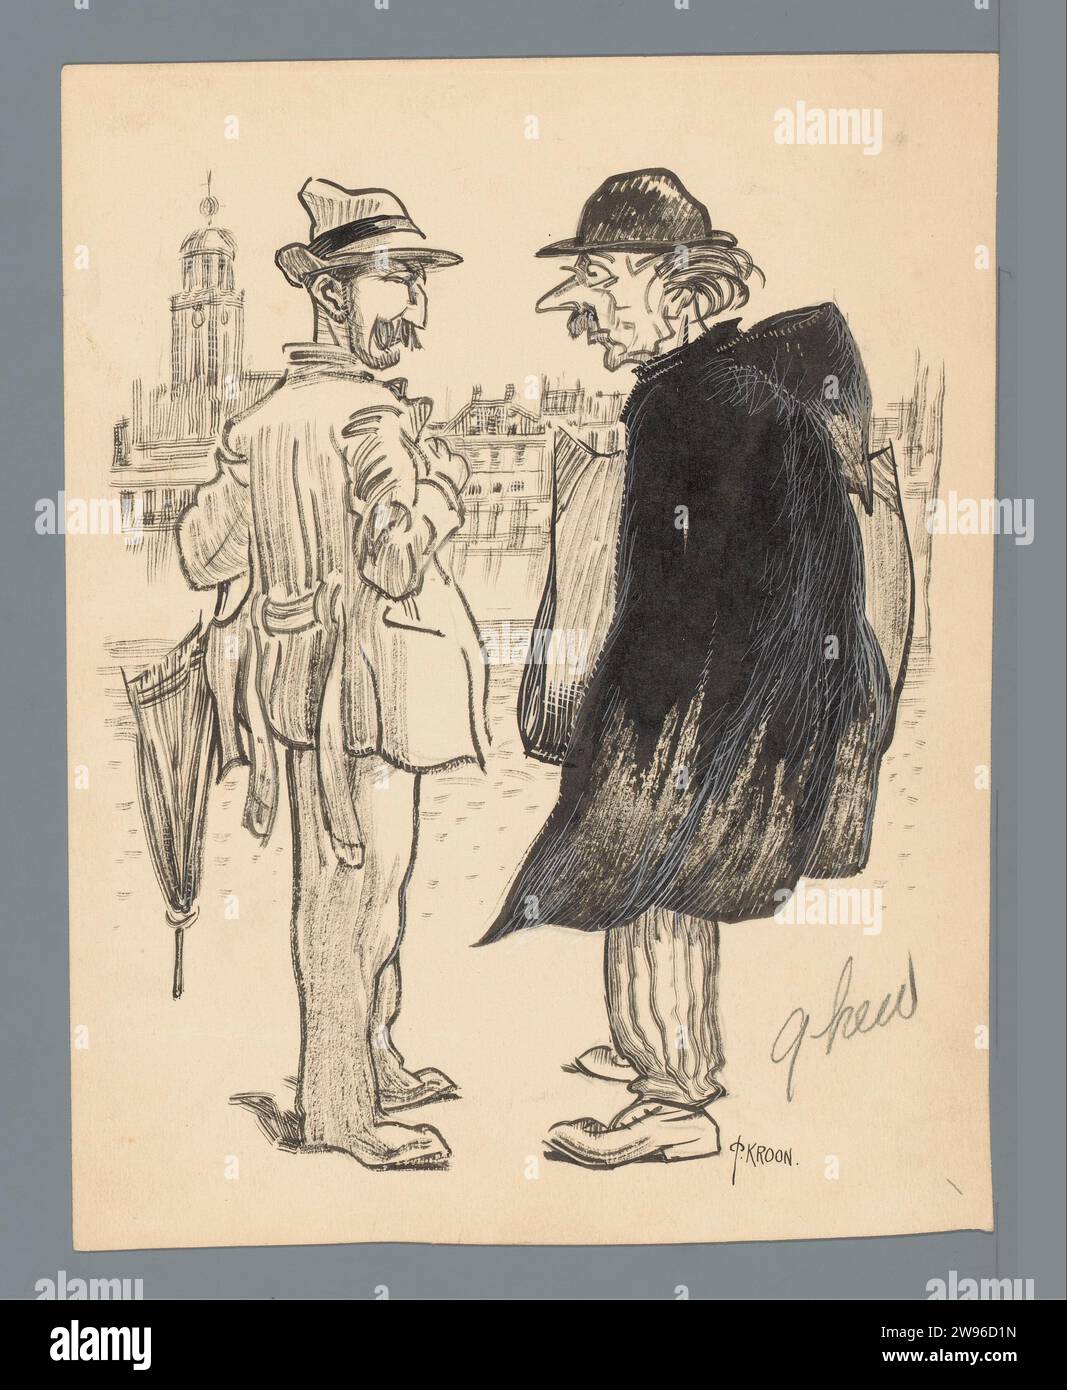 Two men on the street, Patricq Kroon, 1900 - 1940 drawing Two men talk to each other on the street. The man on the right has a print folder under his arm, and may be an artist. Design for a cartoon in the newspaper. Netherlands paper pen / brush political caricatures and satires Stock Photo